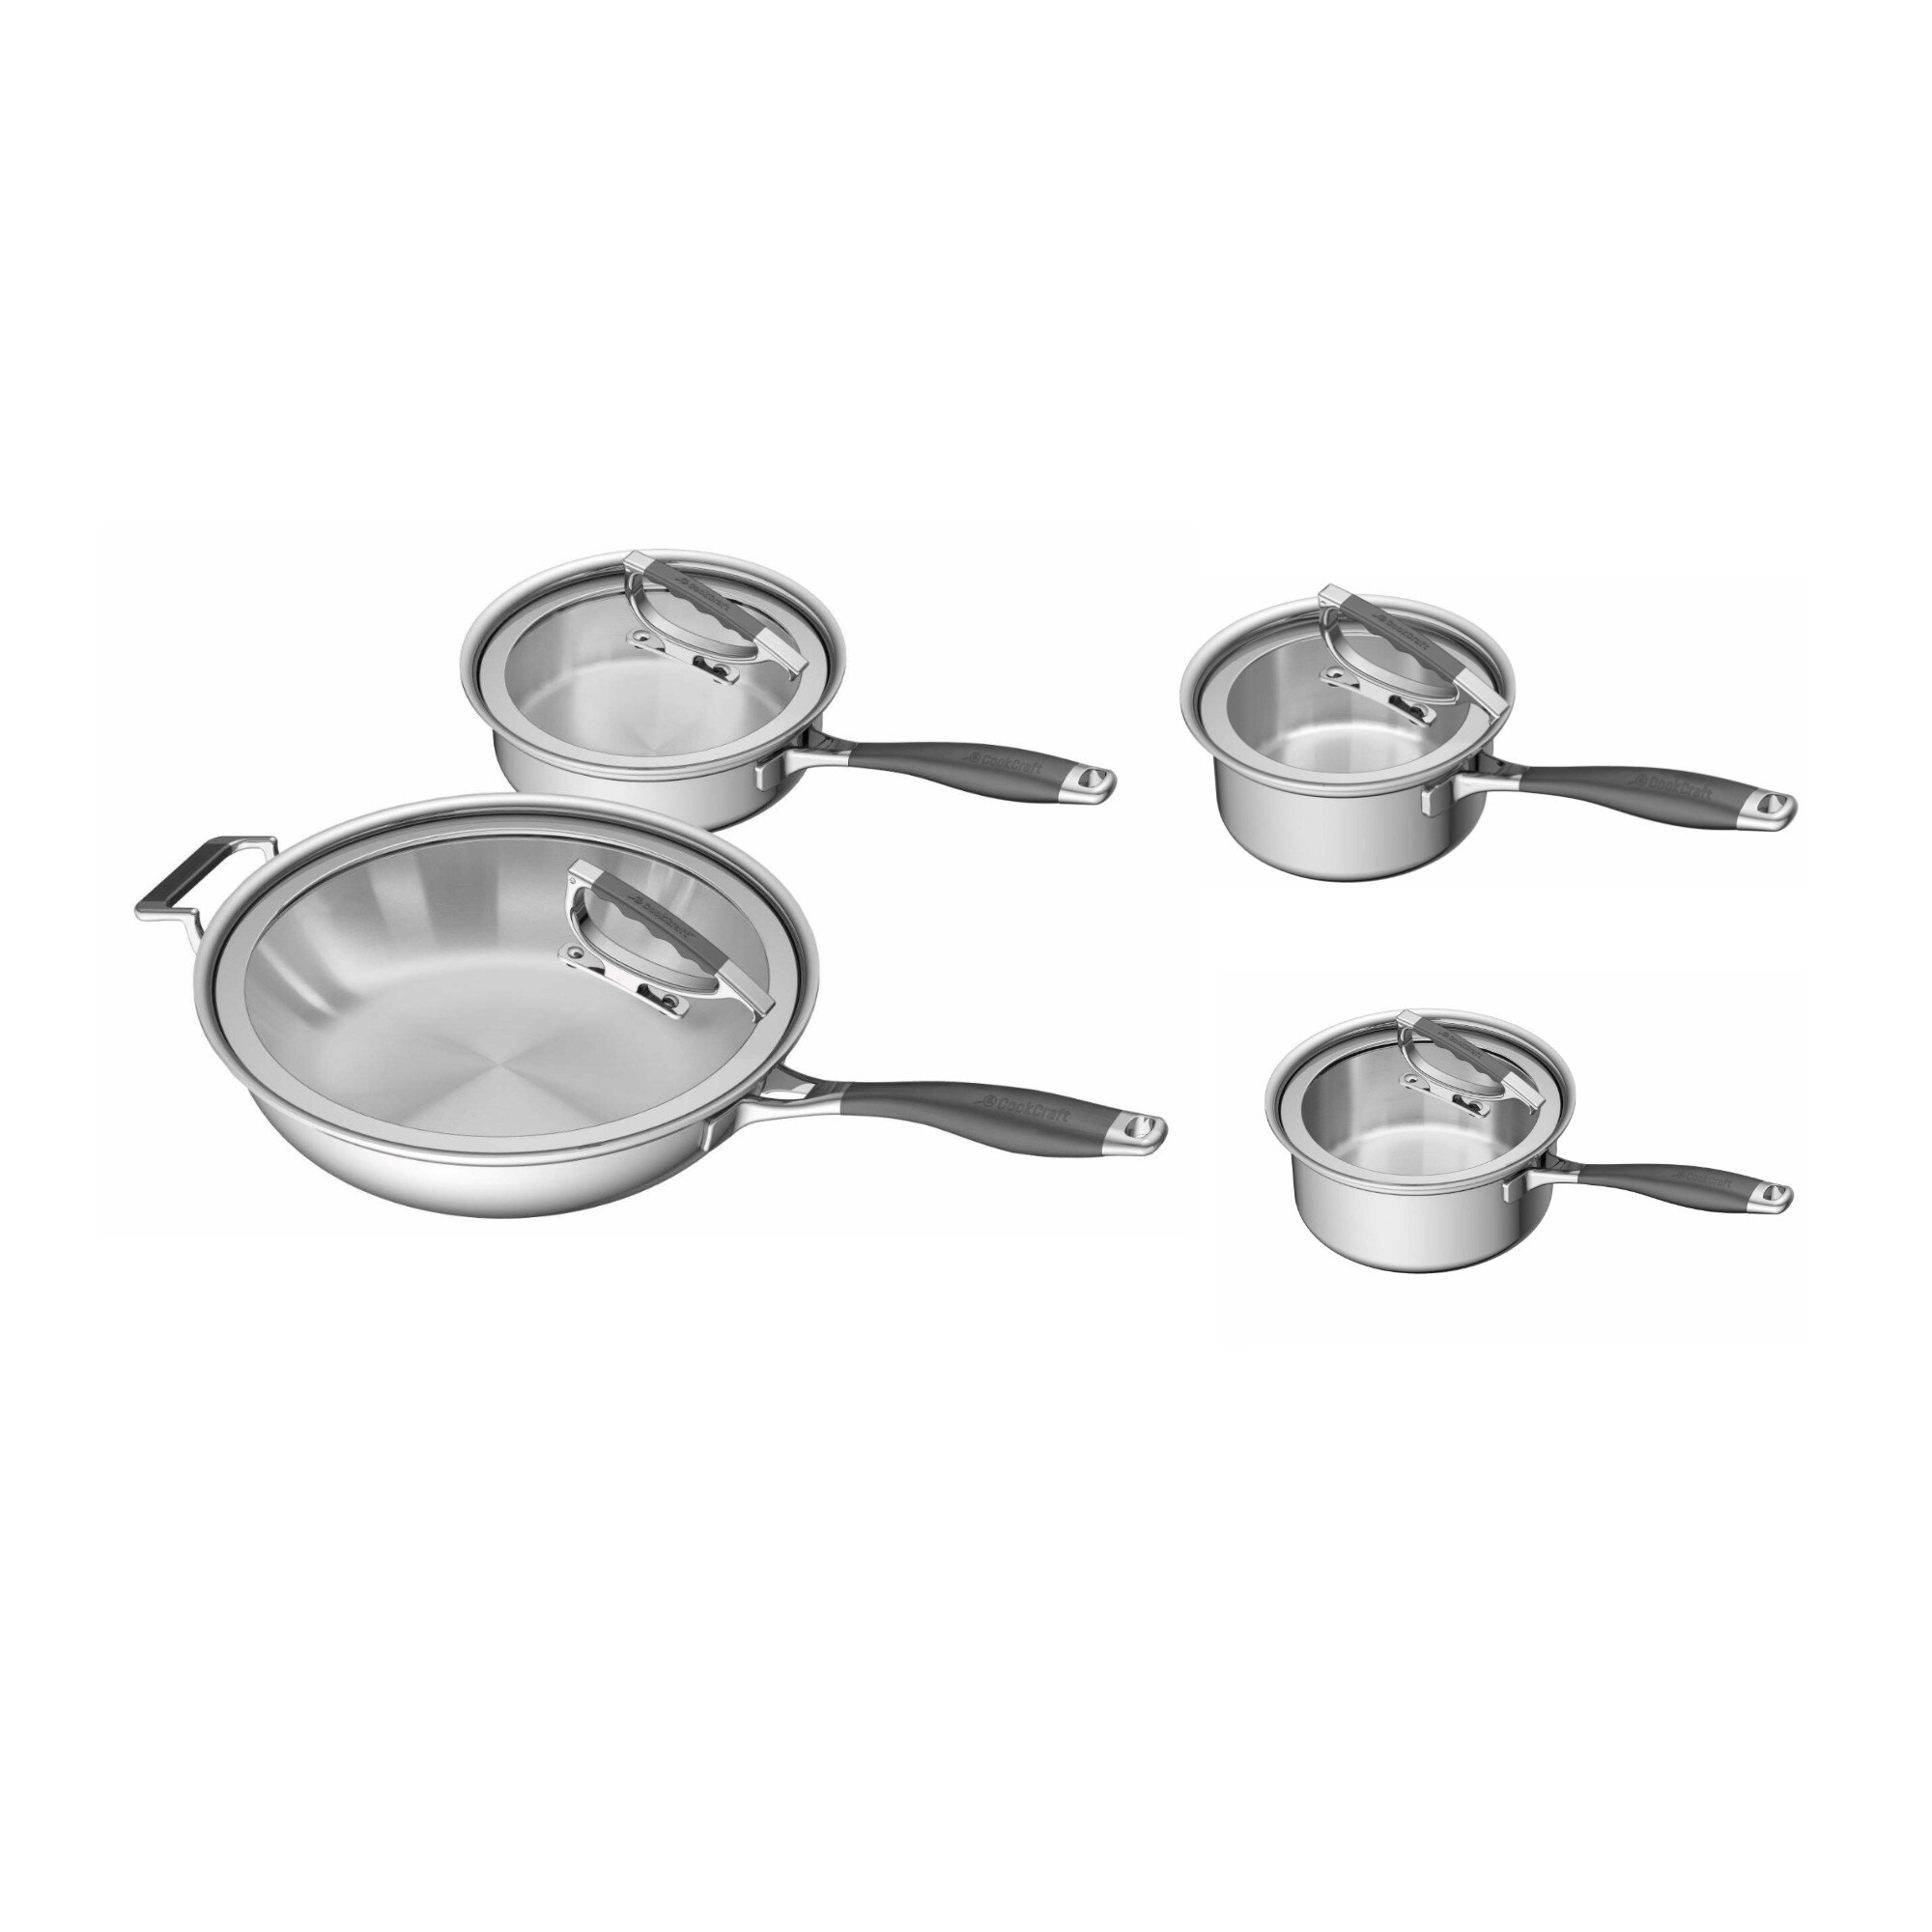 CookCraft 10-Piece Tri-Ply Stainless Steel Cookware Set with Lids